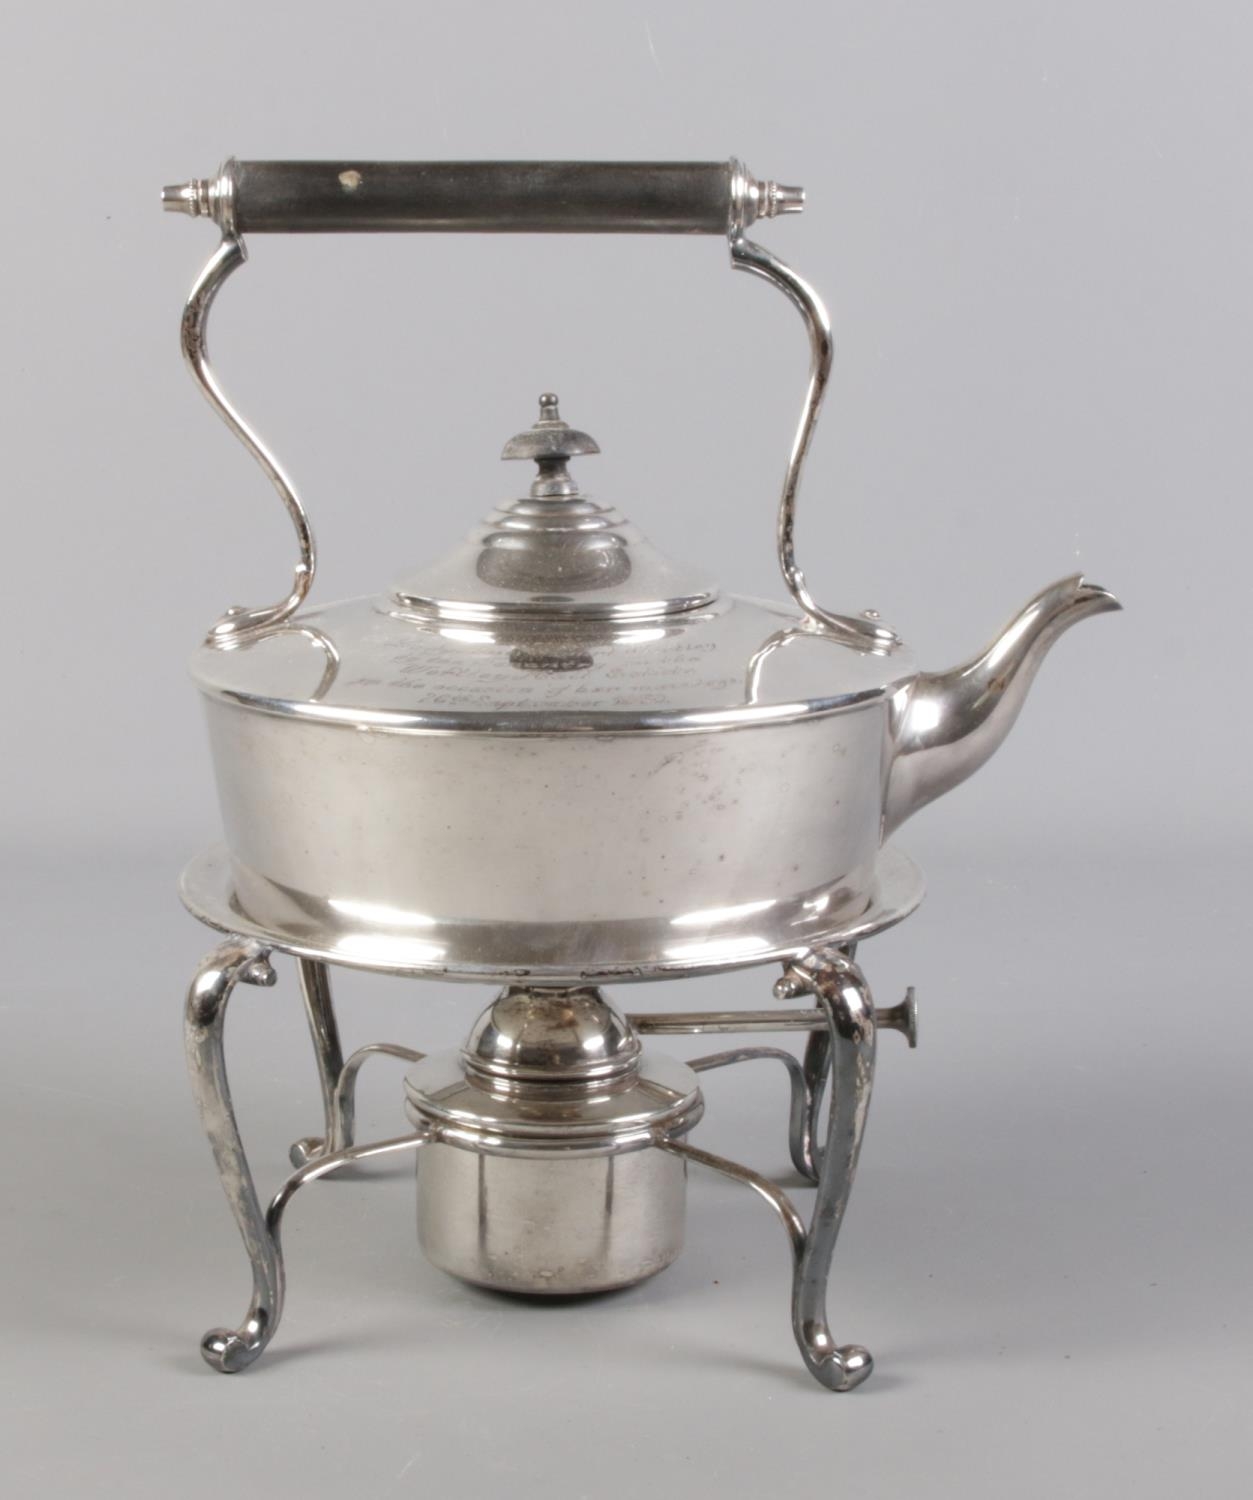 A silver plated spirit kettle presented to Lady Ann Stuart Wortley on the occasion of her marriage